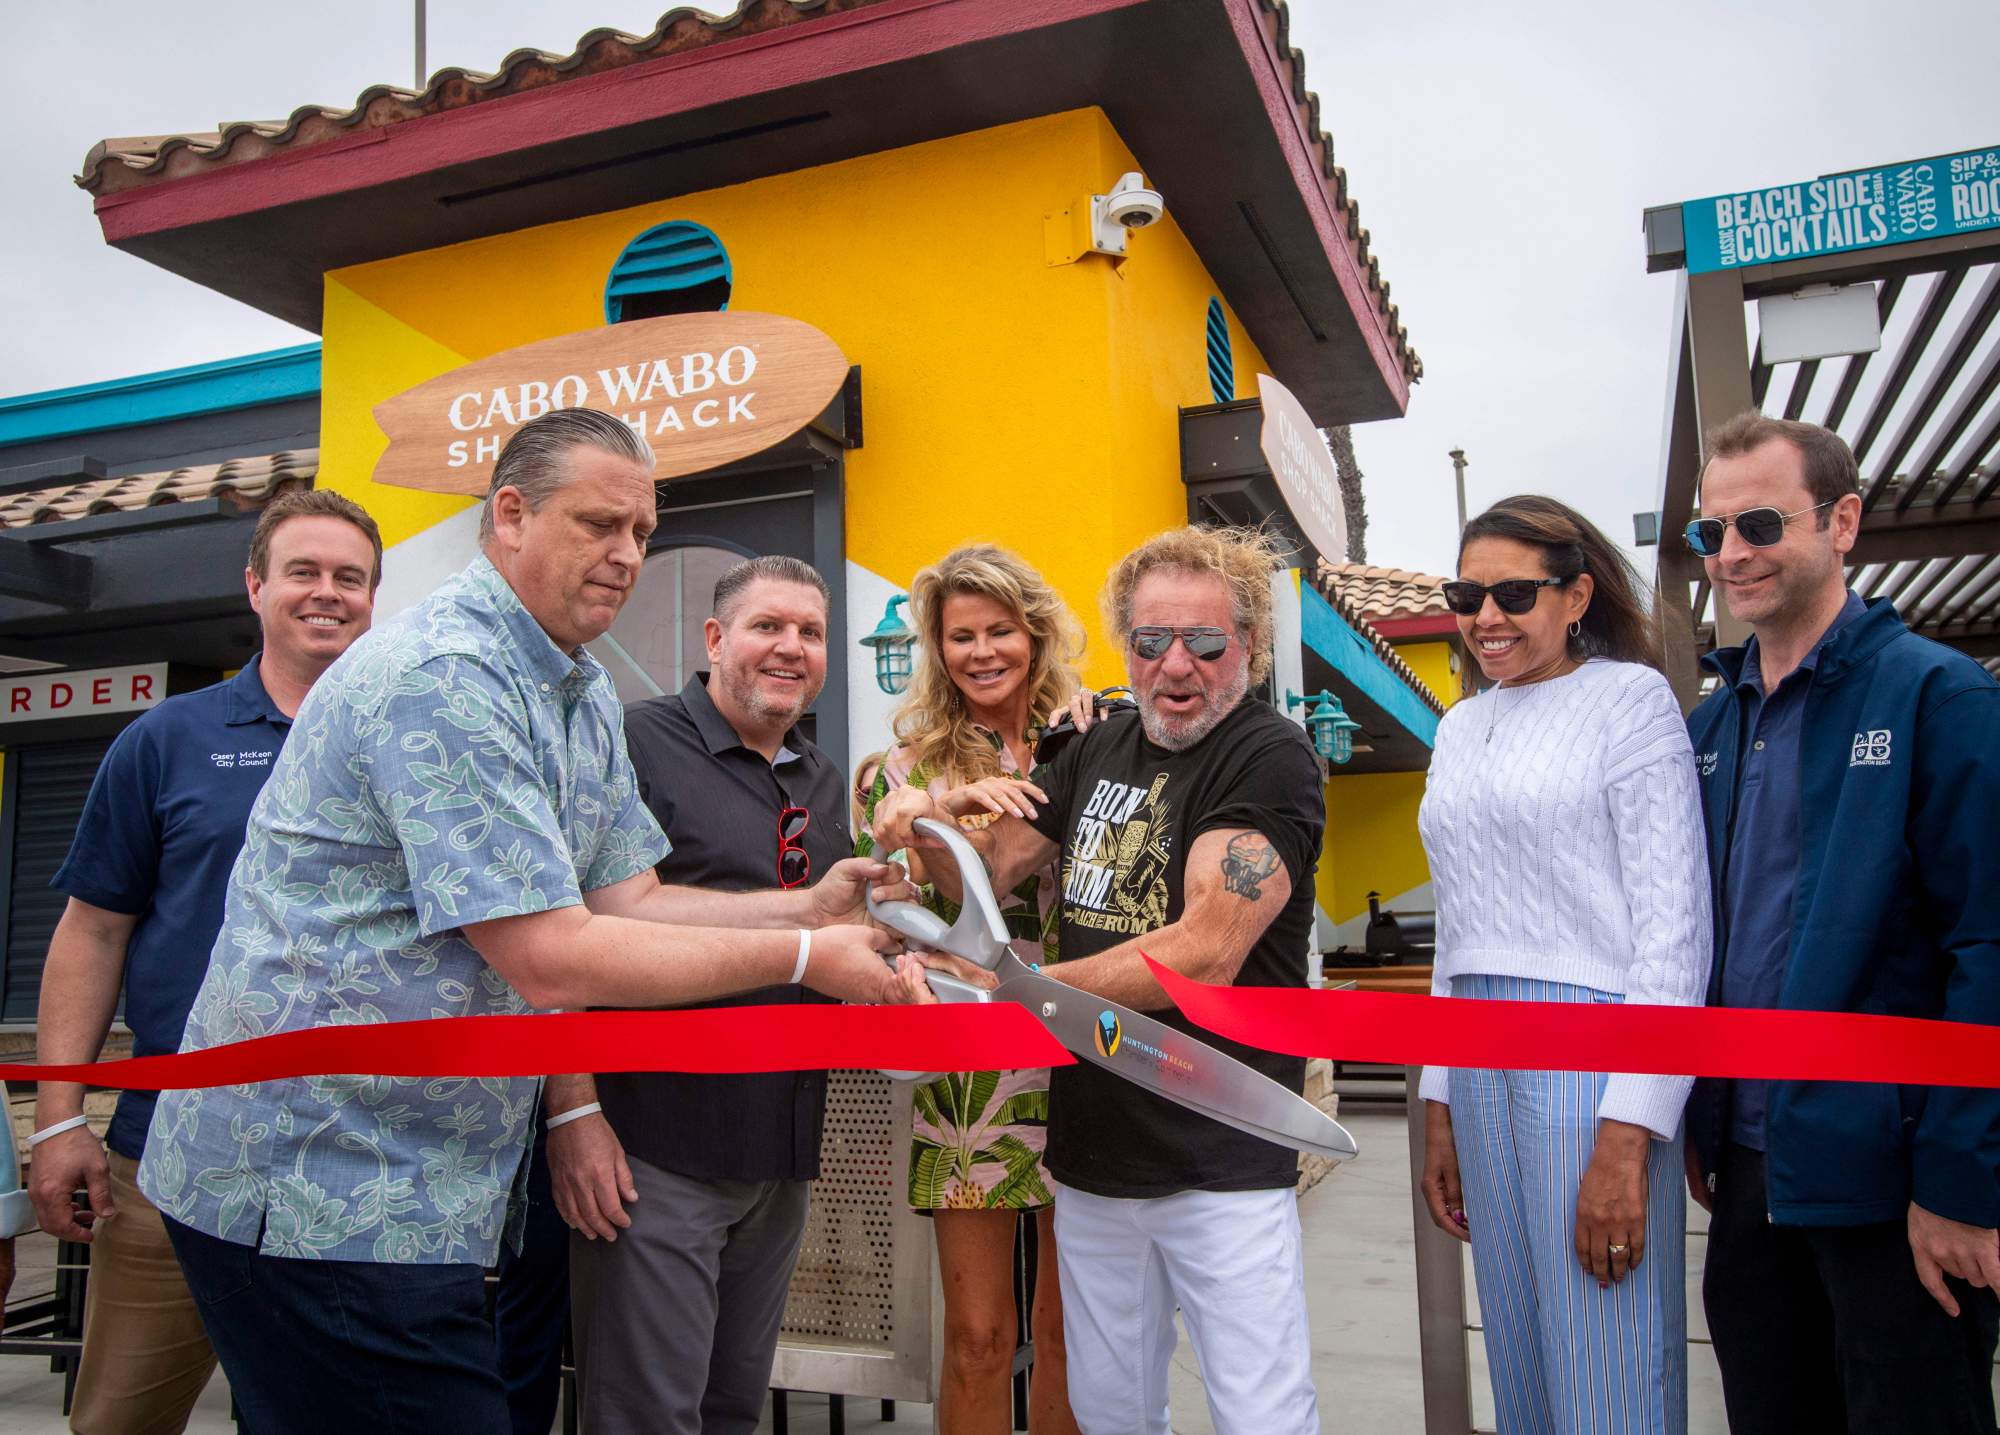 Sammy Hagar and his wife Kari were joined by members of the Huntington Beach city council and Kamran Enayat of The Waterfront Beach resort to cut the ribbon. Officially opening the Cabo Wabo Sand Bar.Sammy Hagar, appeared at the Cabo Wabo Sand Bar in Huntington Beach to commemorate its opening and have a ribbon cutting with The Waterfront Beach Resort on Friday May 17, 2024 (Photo by Michael Goulding, Contributing Photographer)